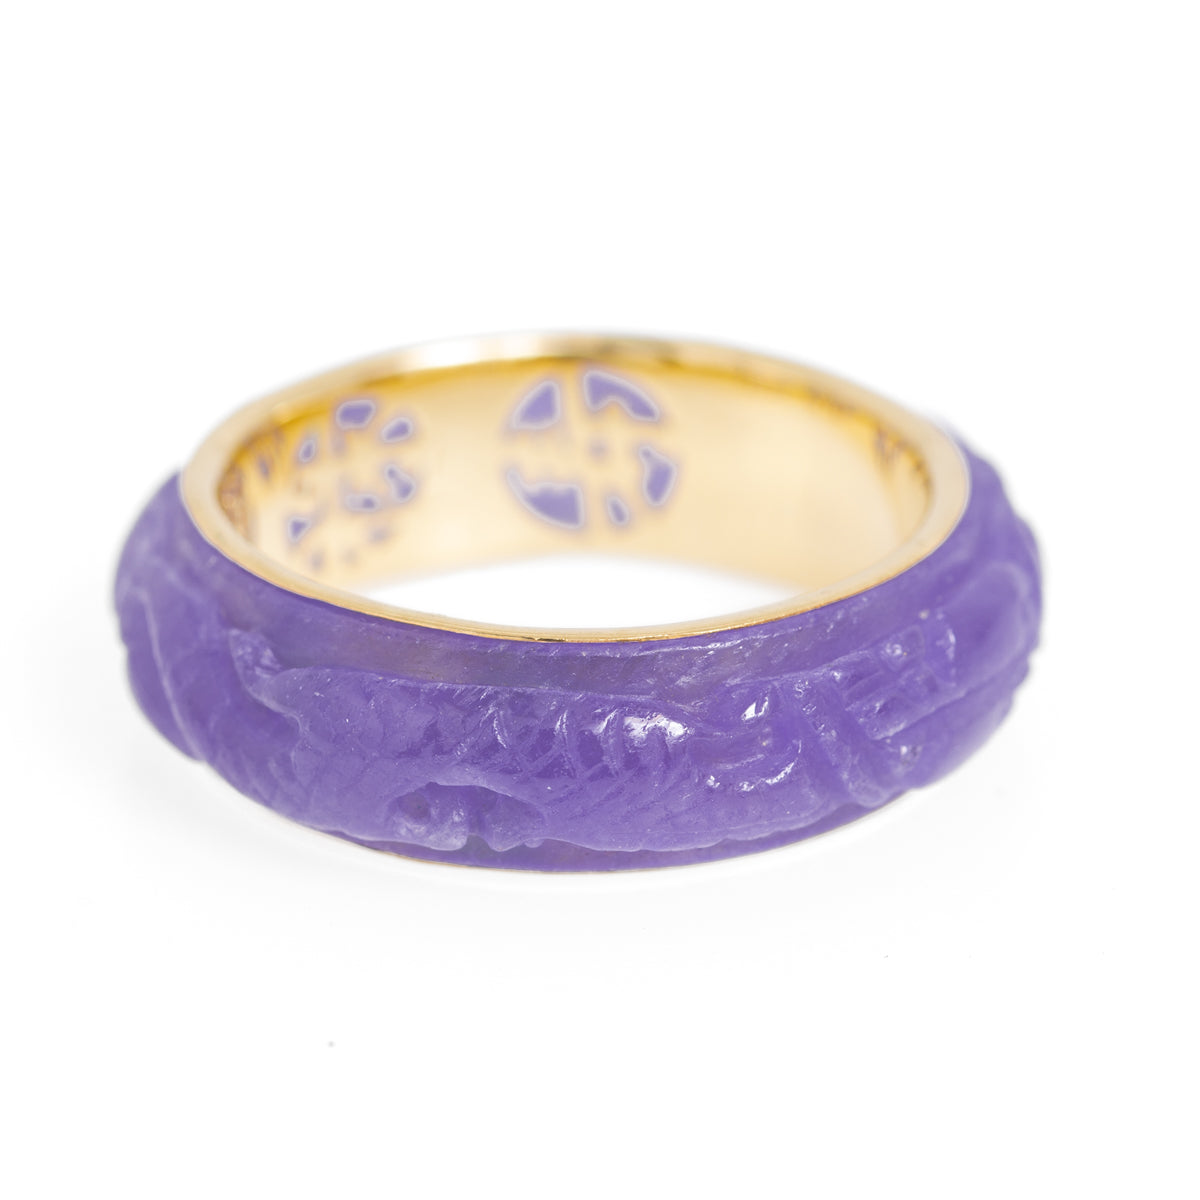 14K Gold & Carved Lavender Jade Ring Band QVC Gems Of The Orient UK Size U (A1150)